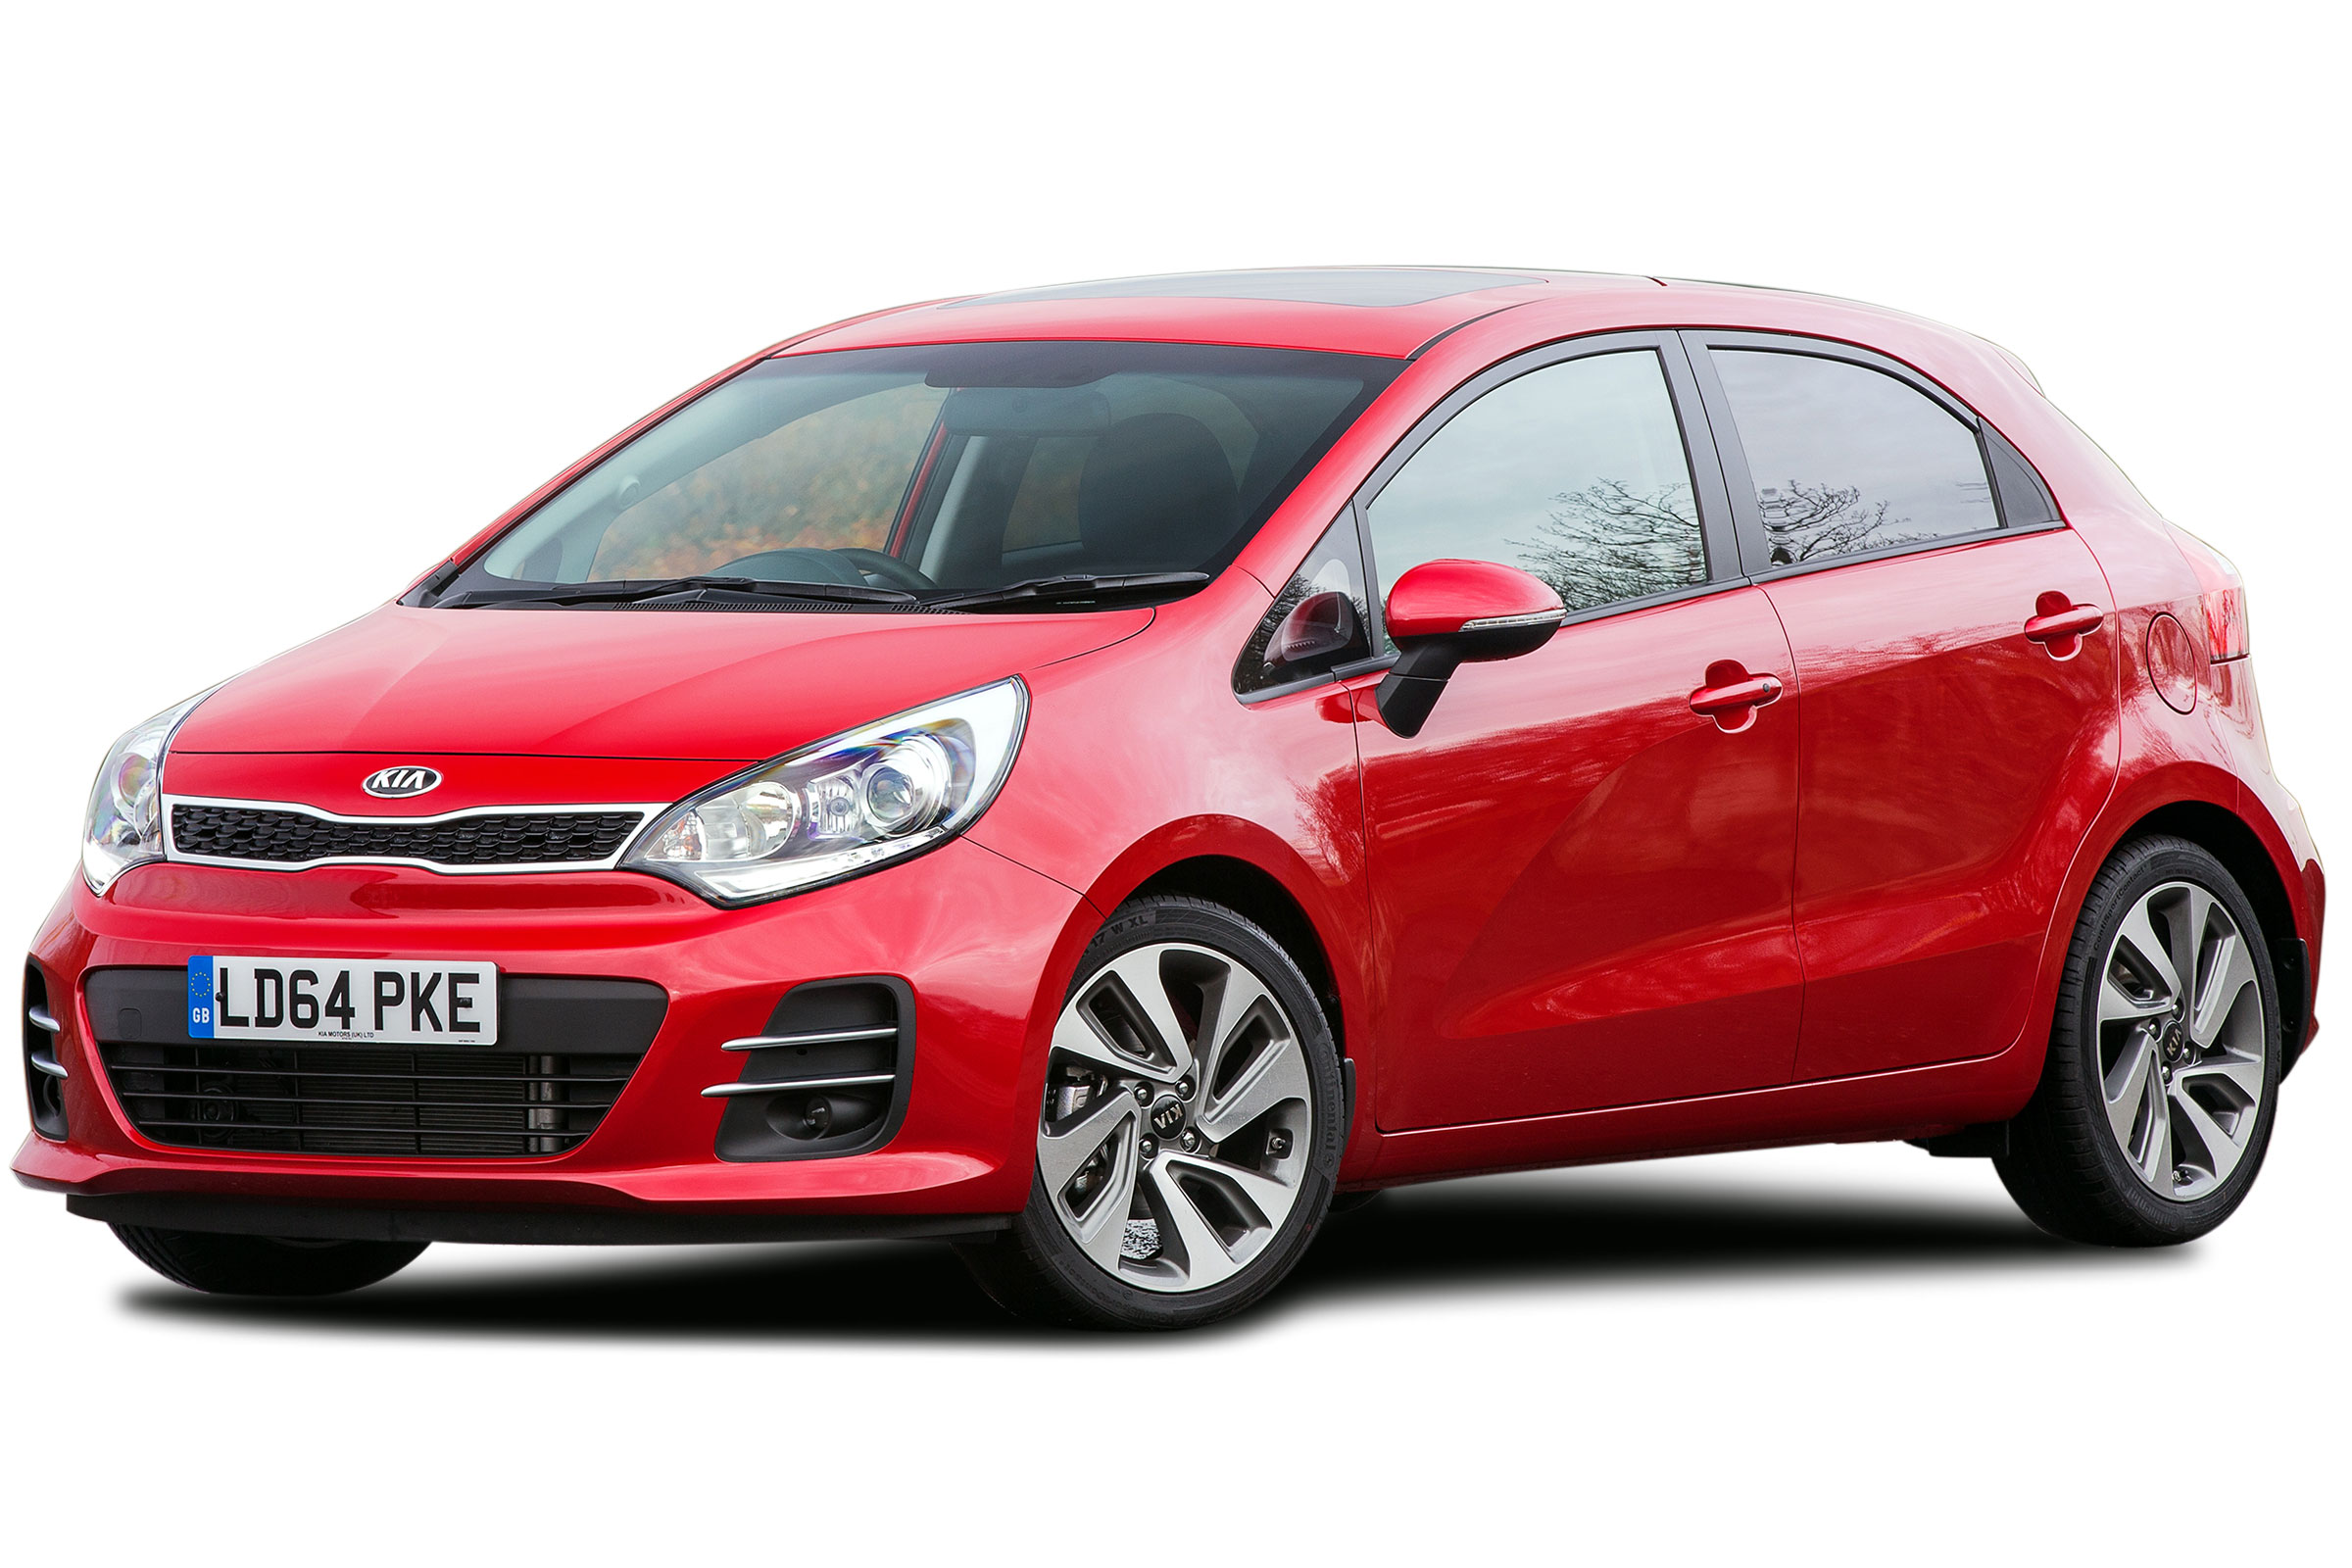 Kia Rio Hatchback 11 17 Practicality Boot Space Carbuyer